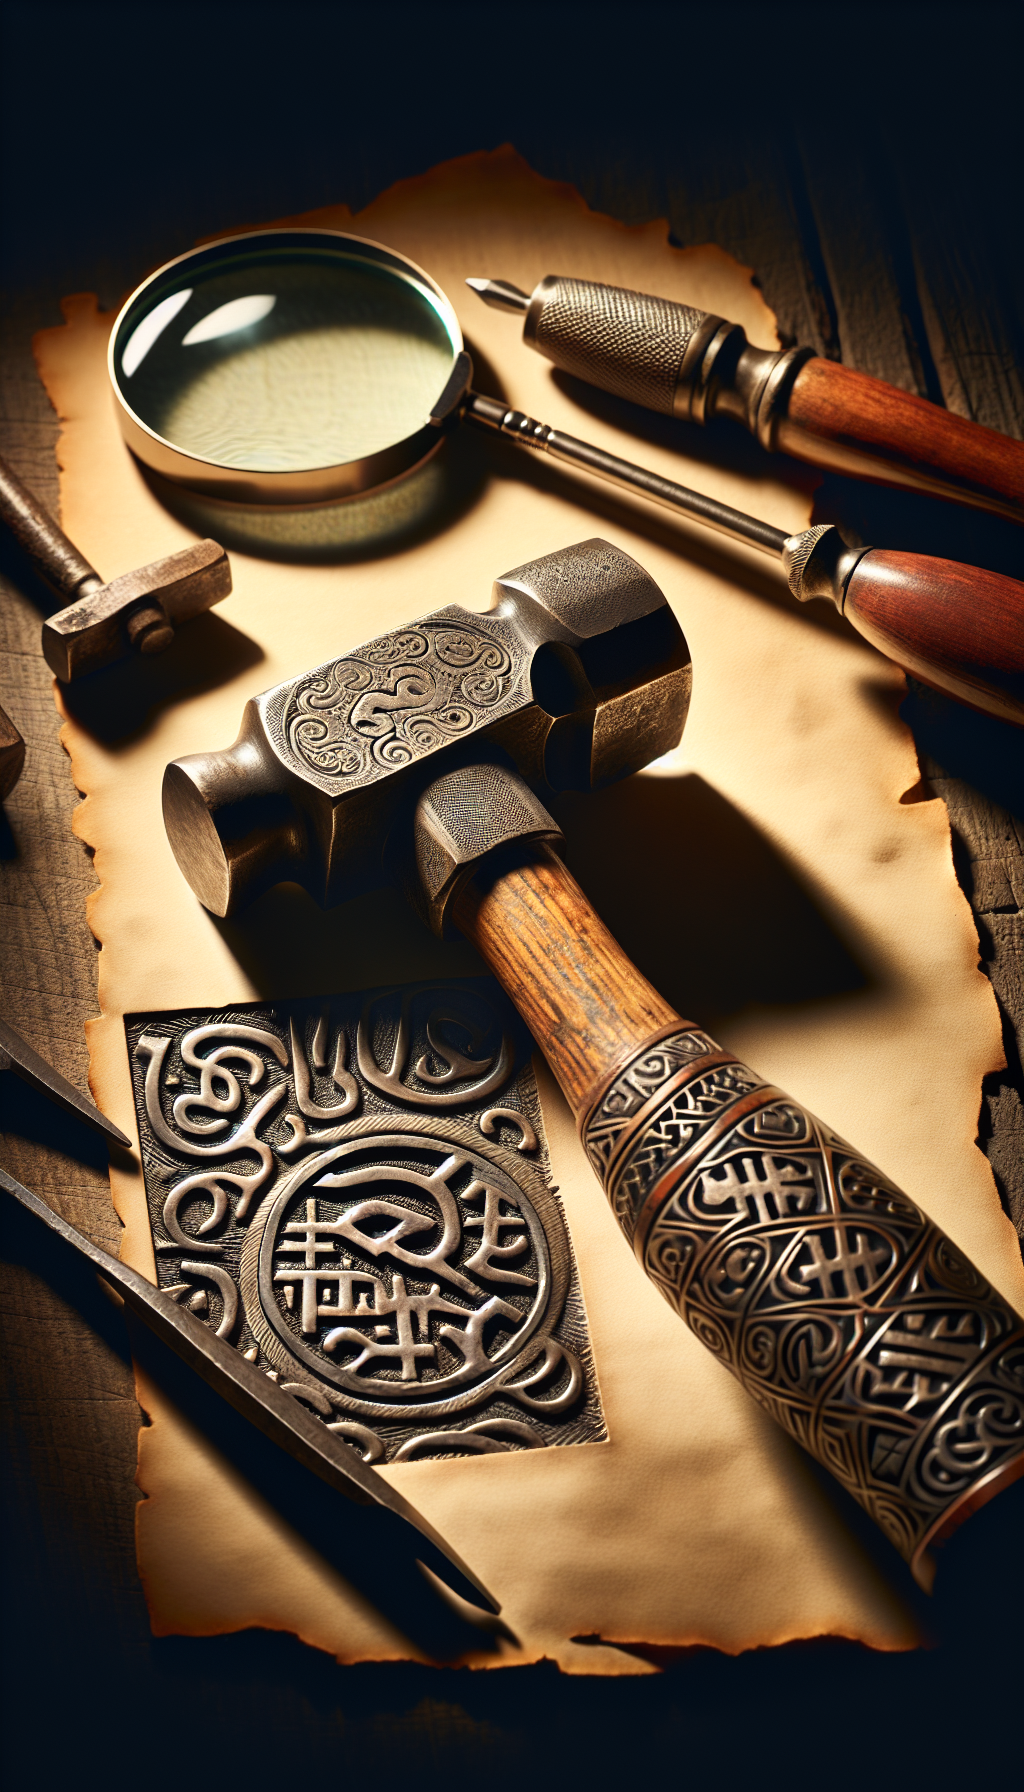 In an elaborate tapestry of metallurgy and history, an ancient hammer rests upon a weathered workbench, its handle inscribed with cryptic maker's marks. The background reveals a magnifying glass focusing on these unique symbols, unraveling their mystery, while shadowy outlines of antique tools fade into the parchment-colored edges, symbolizing the quest to identify relics of craftsmanship from bygone eras.